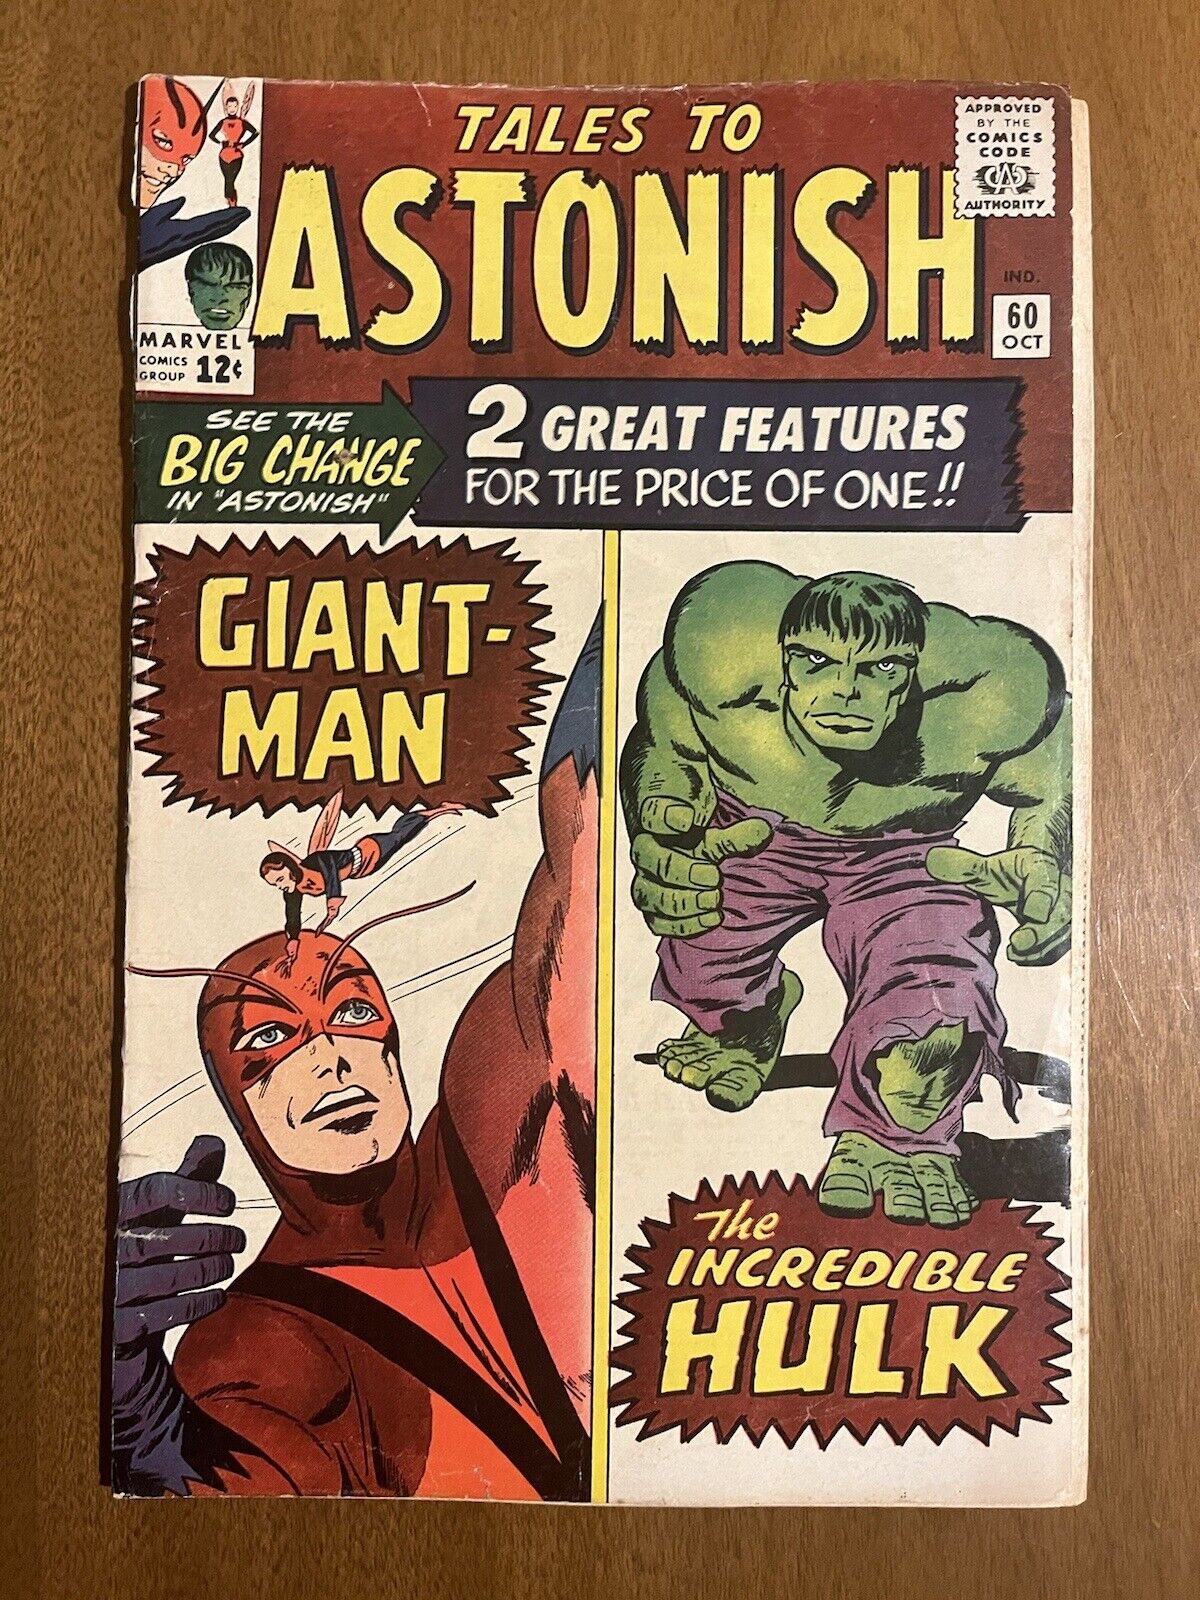 Tales to Astonish #60/Silver Age Marvel Comic Book/VG-